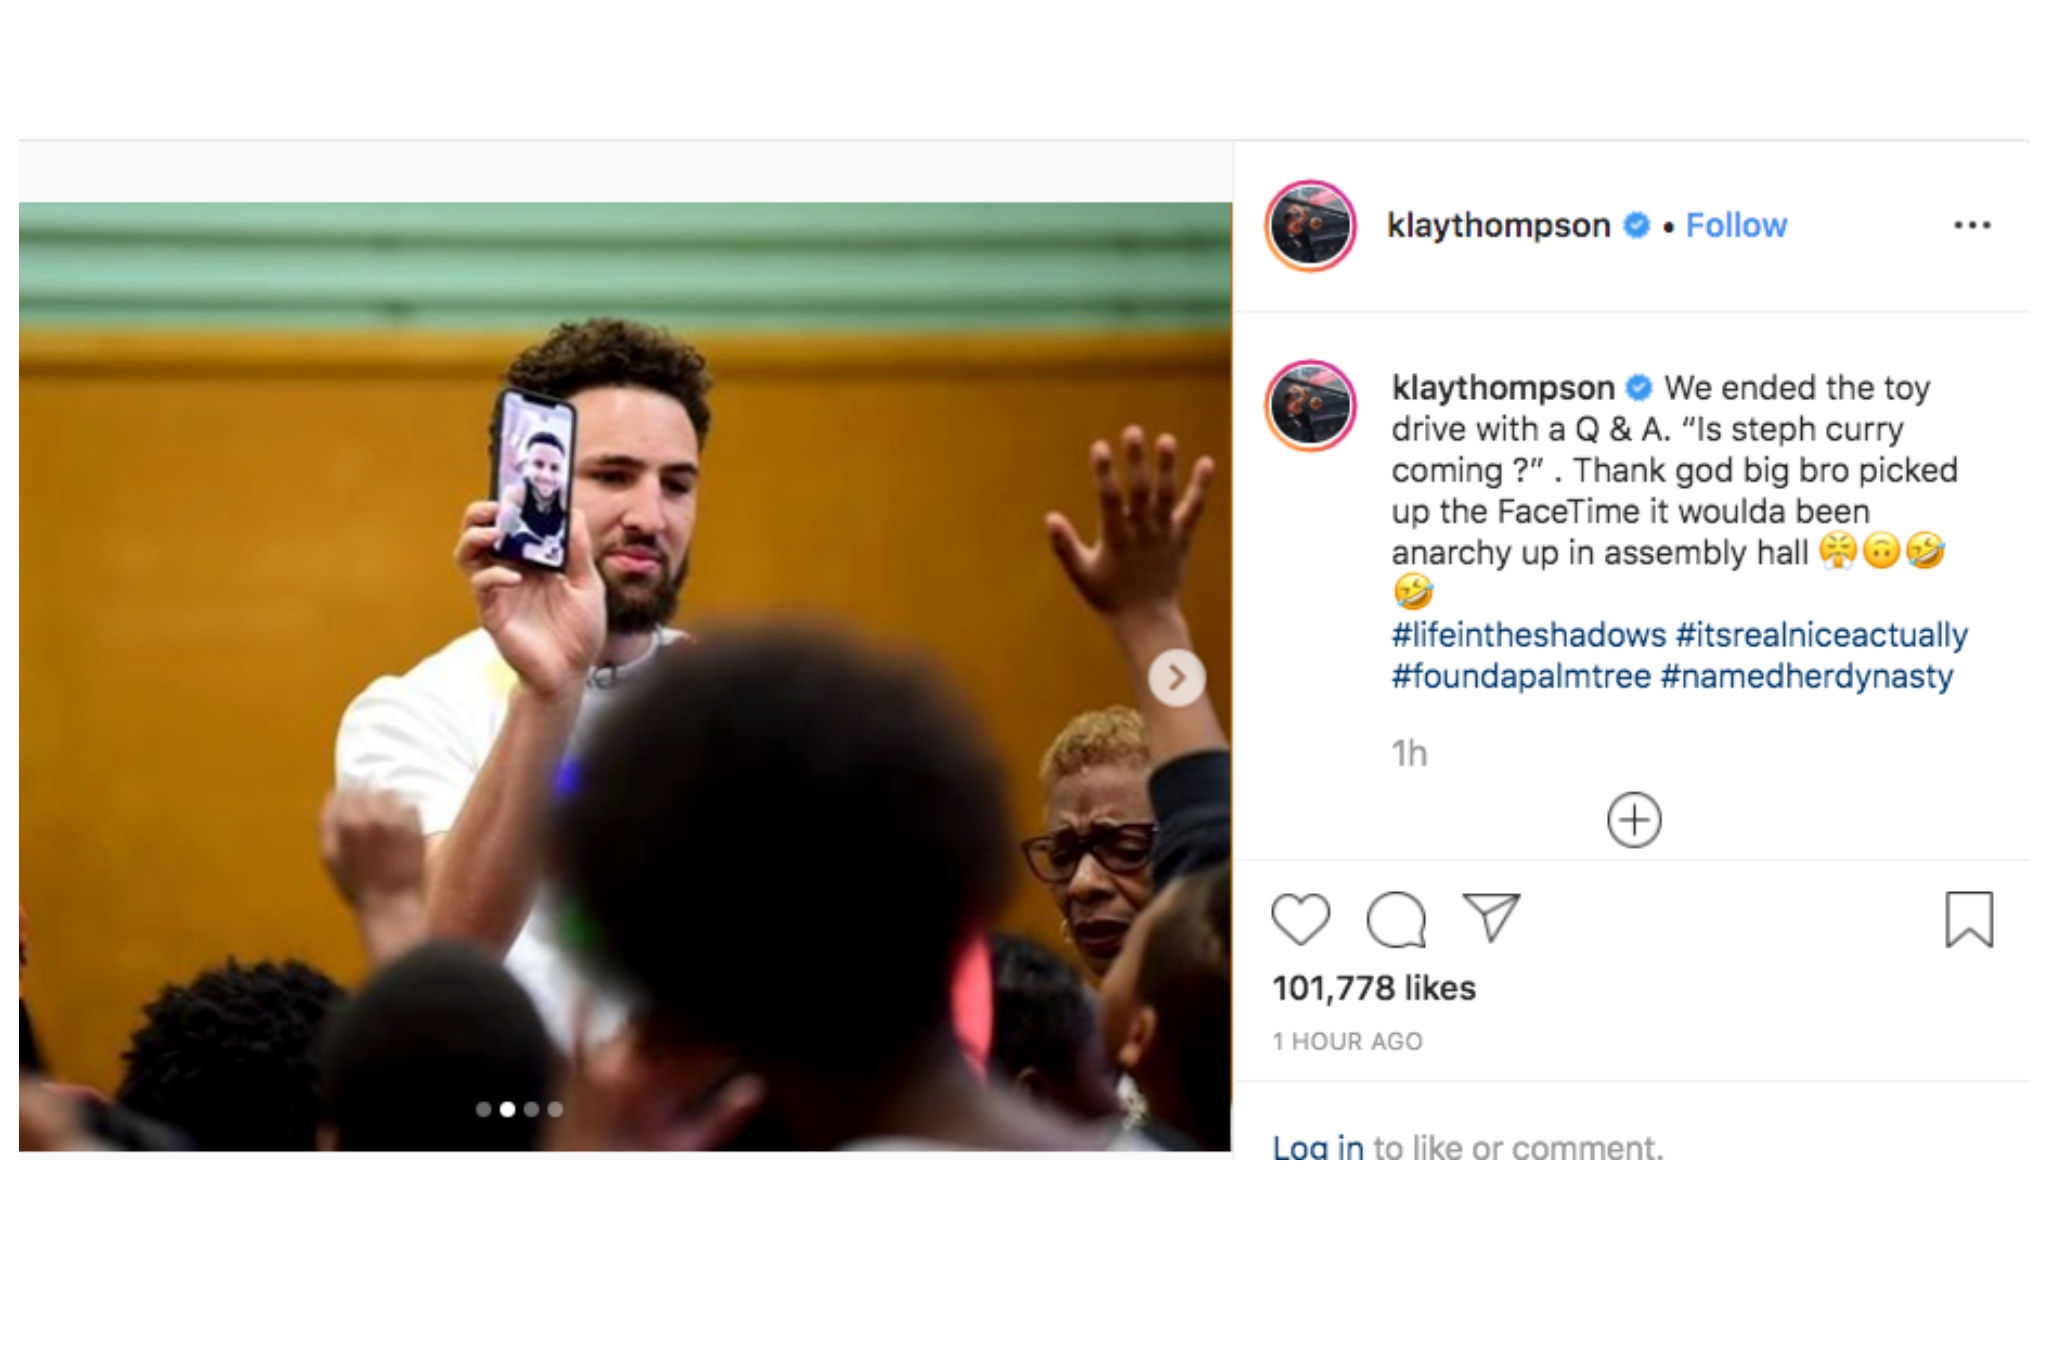 Laura Harrier and Klay Thompson's Cutest Pictures